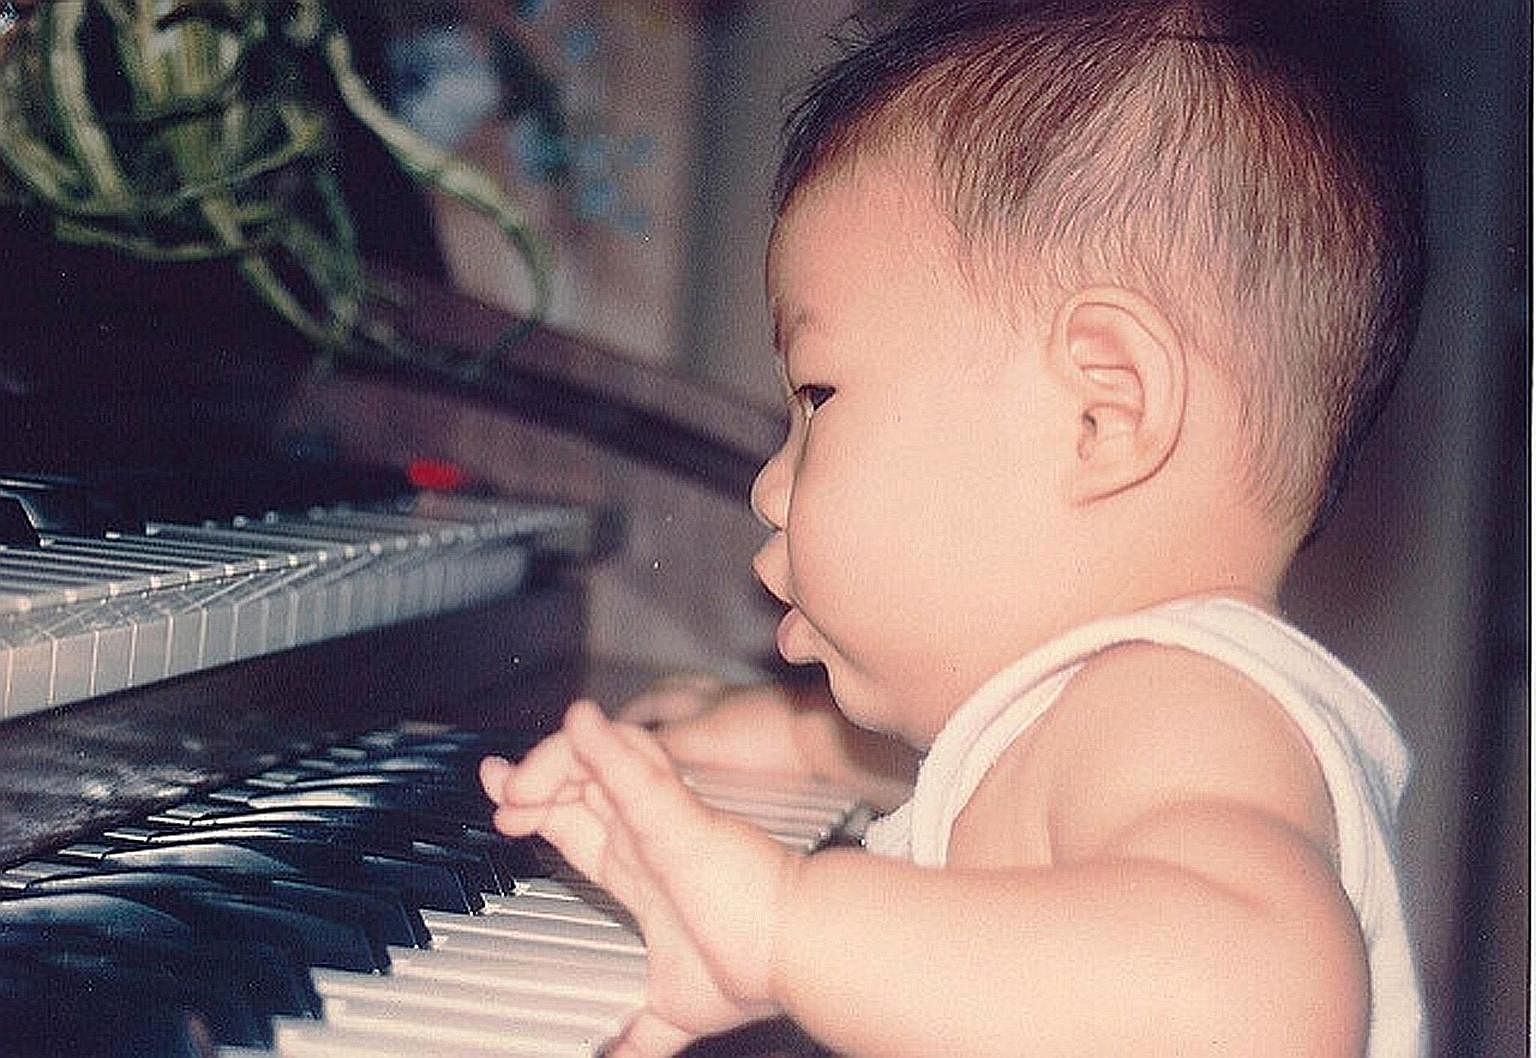 When Dr Tan was five, he attended a Yamaha keyboard class. He enjoyed it so much that his parents started him on private lessons. The Community Chest TrueHearts show is one of many charity events that Dr Tan has performed for. Dr Tan at the Yong Siew